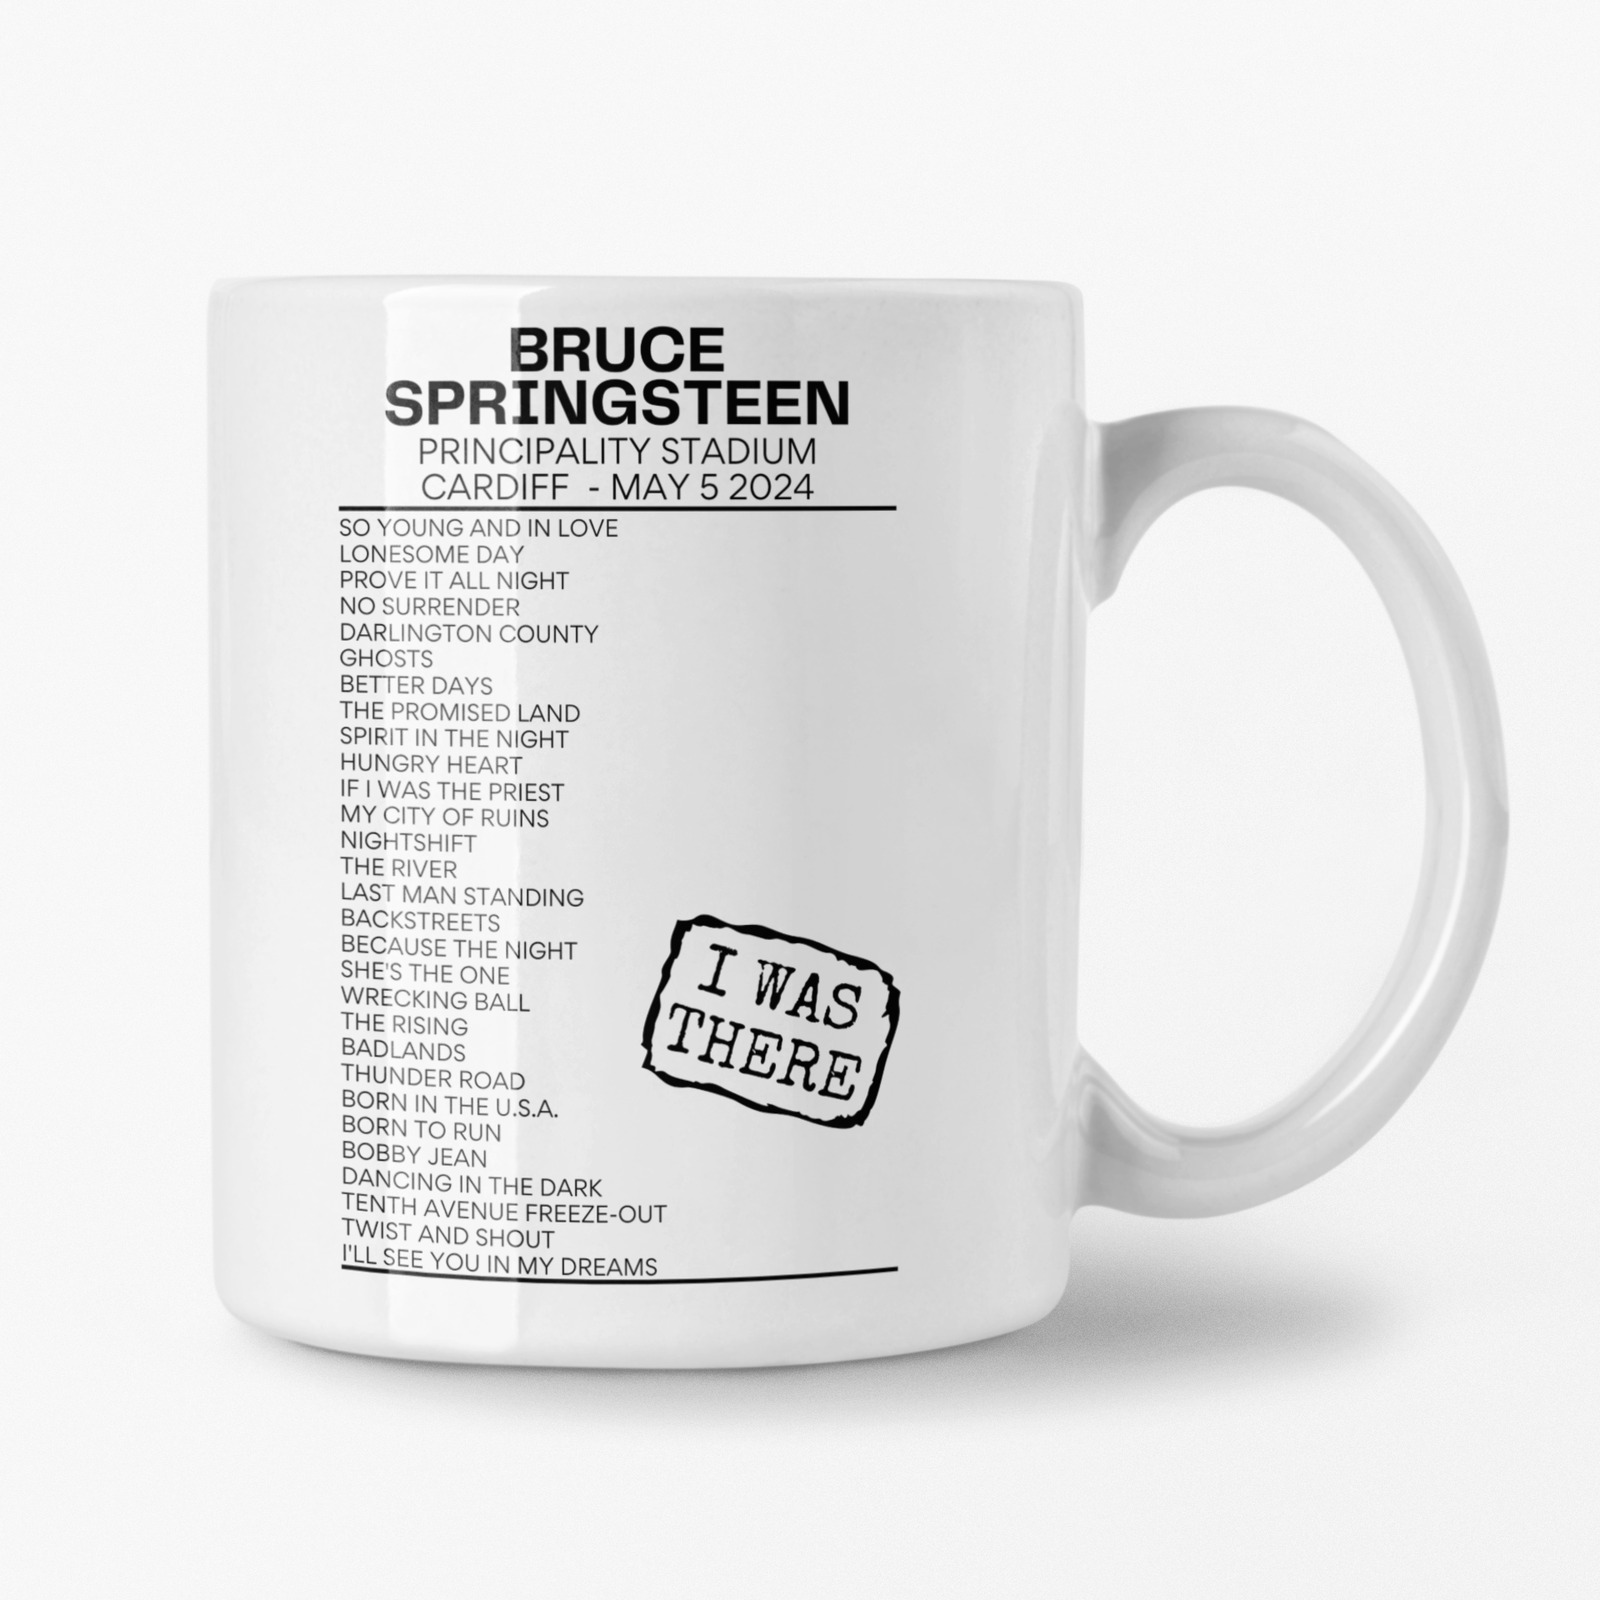 Bruce Springsteen Cardiff May 5 2024 Setlist Mug - I Was There